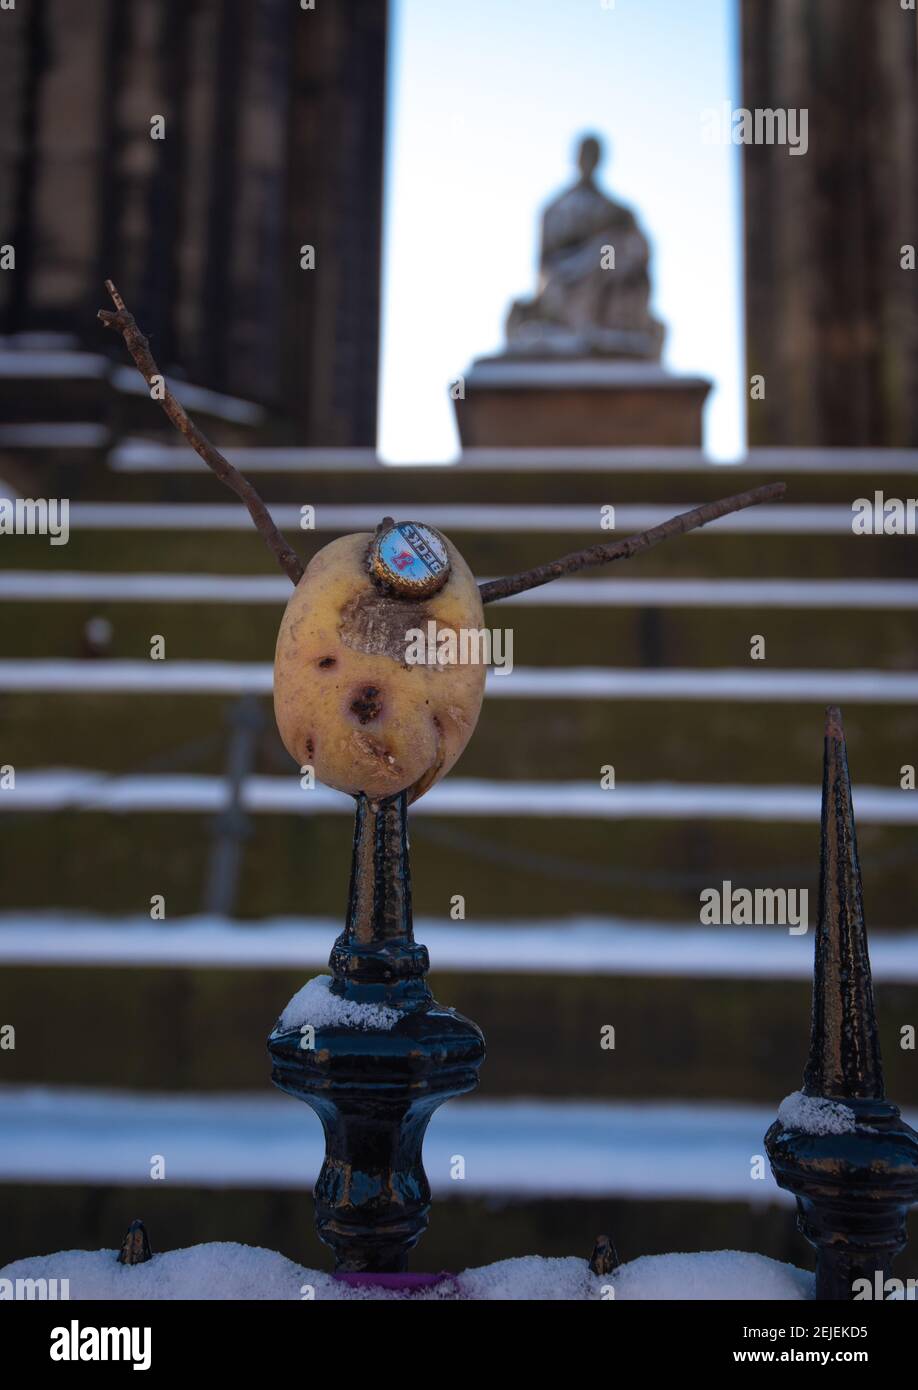 Funny Scottish humour, DIY Mr Potato Head with beer bottle face and stick arms by the Scott Monument, Edinburgh. Stock Photo